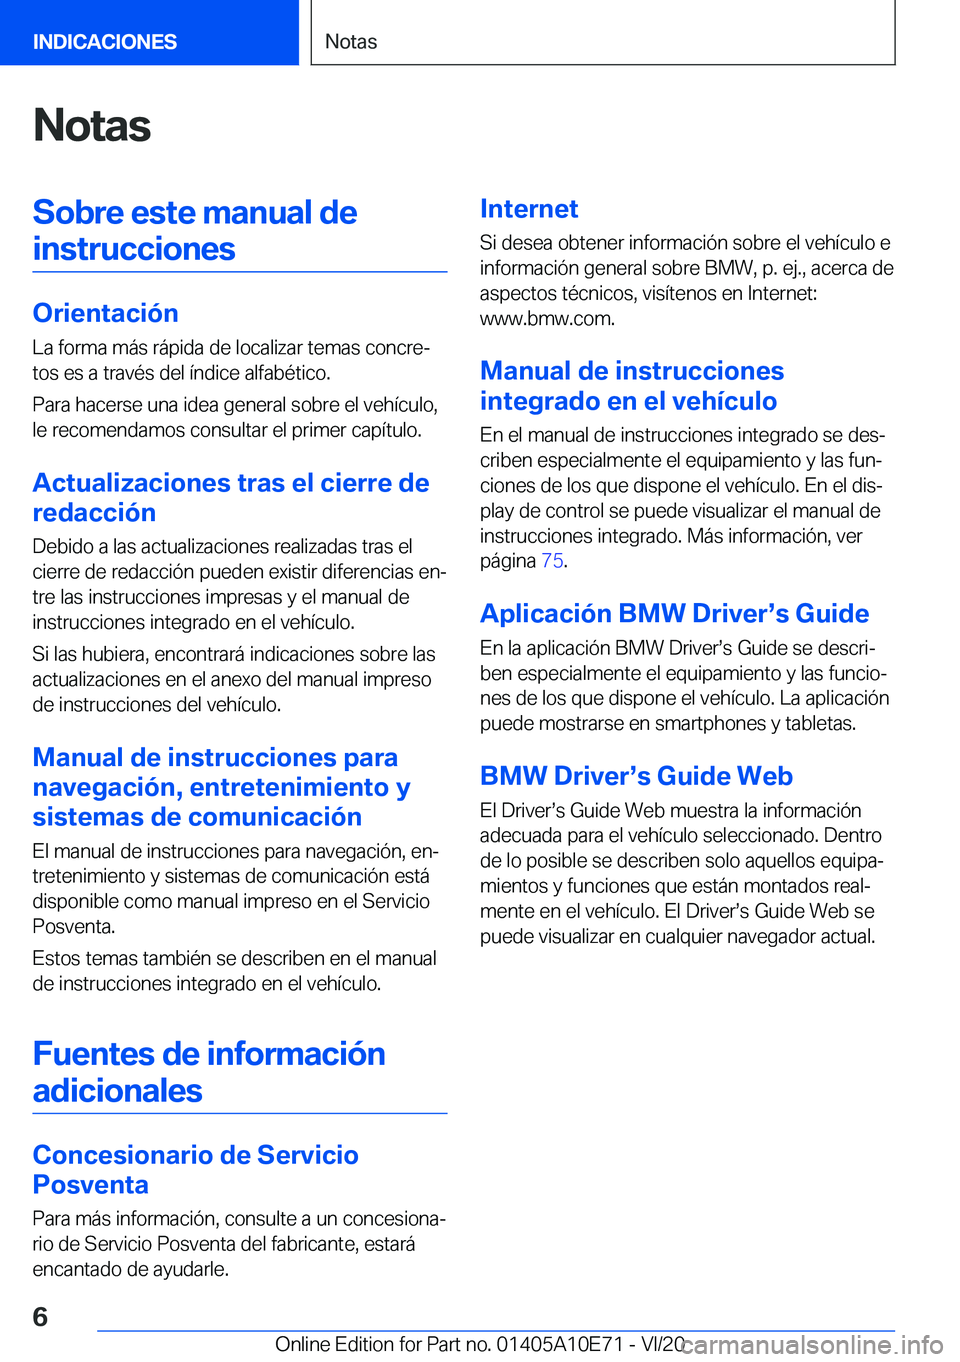 BMW X3 2021  Manuales de Empleo (in Spanish) �N�o�t�a�s�S�o�b�r�e��e�s�t�e��m�a�n�u�a�l��d�e�i�n�s�t�r�u�c�c�i�o�n�e�s
�O�r�i�e�n�t�a�c�i�